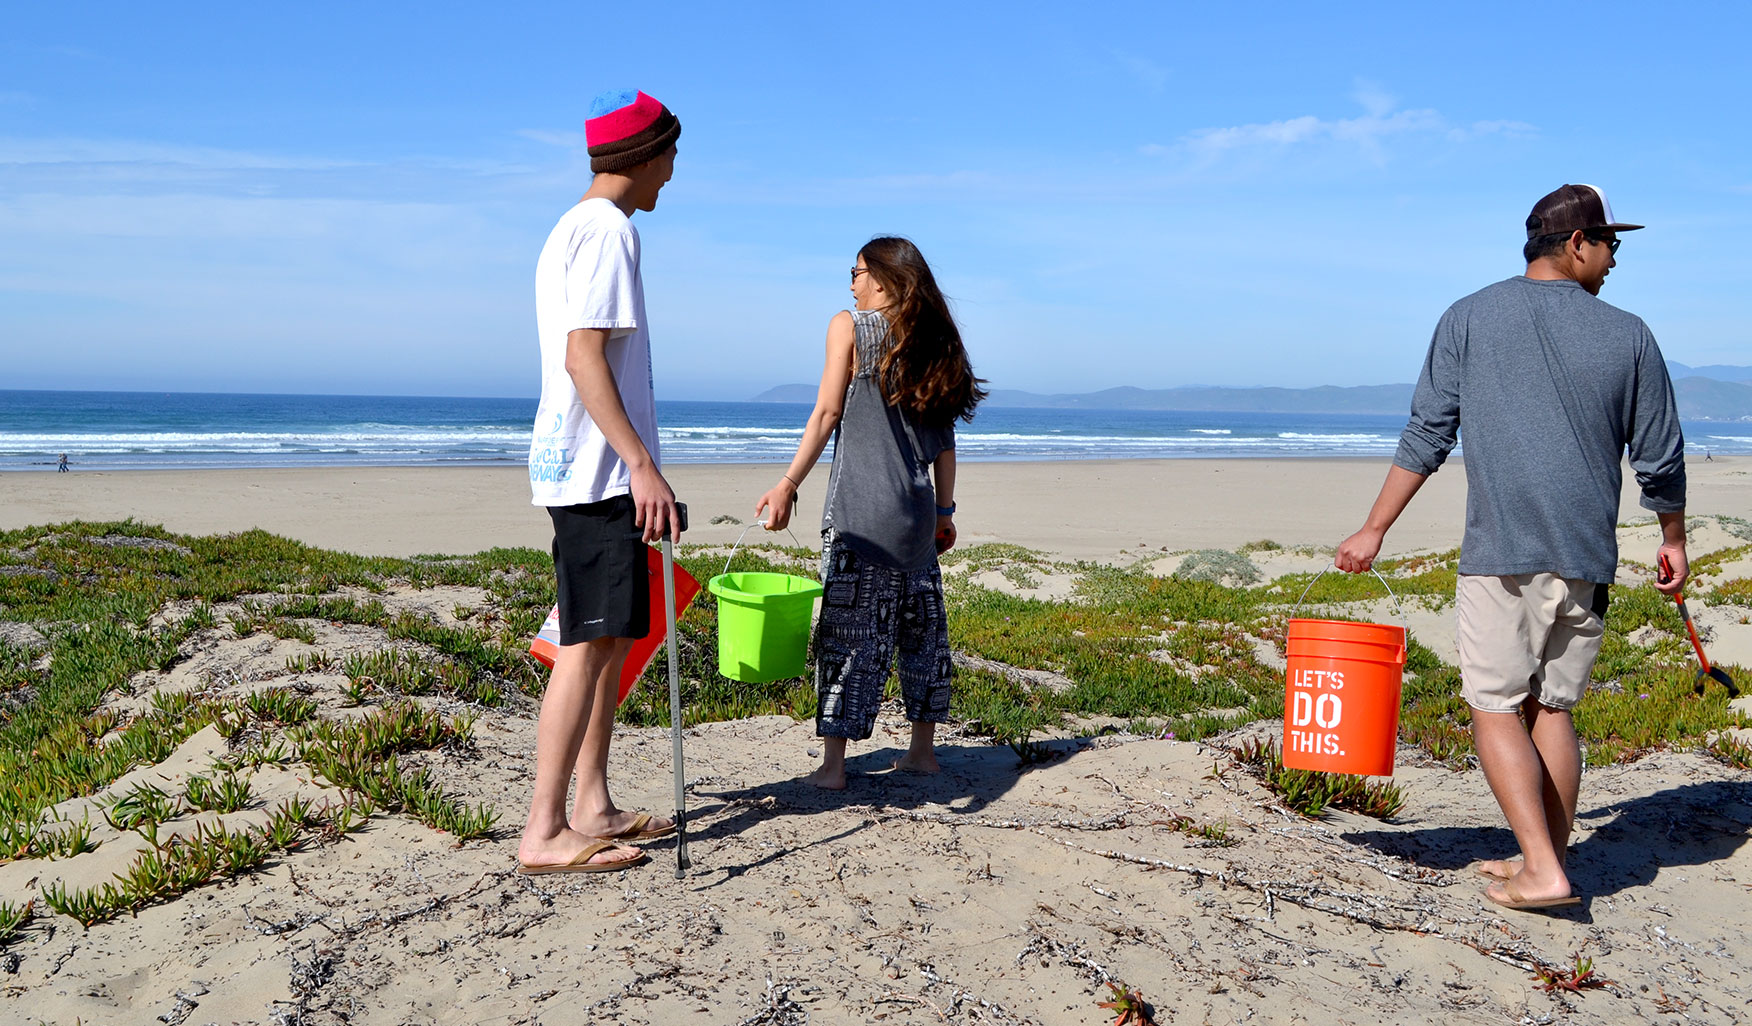 5th year Industrial Engineering major and Club President Alex Ly, Camille Morr, and English major graduate Liam Hedriana scour the sand for debris left behind by beach-goers. 'We actually struggled to find trash today,' said Hedriana.
'But I think that’s good, because we’re used to cleaning up places like Pirate’s Cove and finding 300 pounds of trash. People are sleeping on the beach there, we find condoms on condoms.'